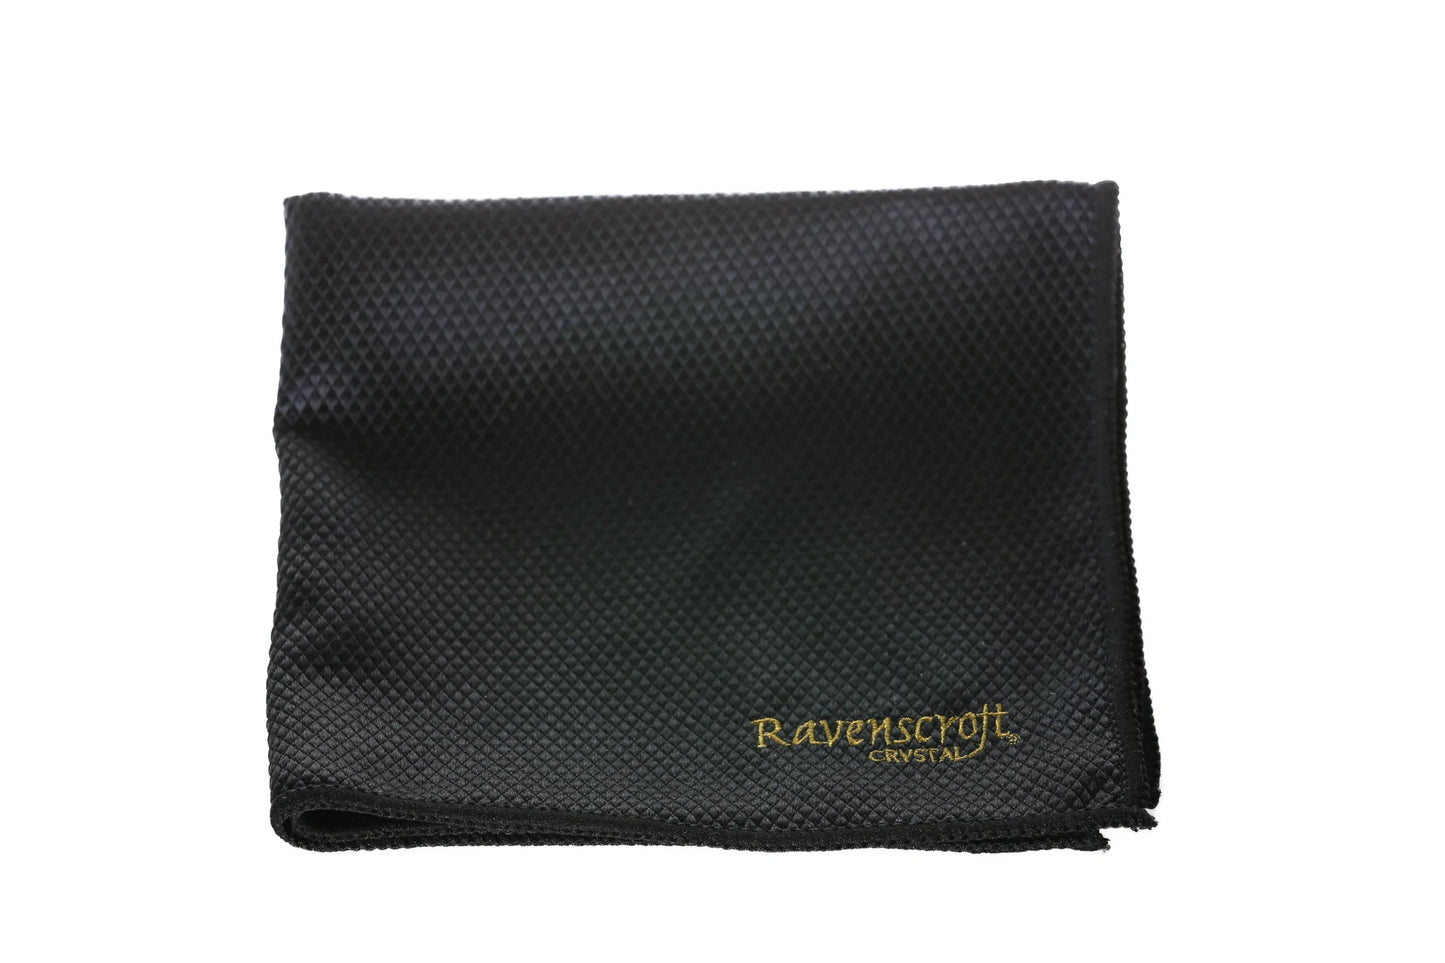 Ravenscroft Amplifier Vintner's Crystal Tasting Glass (Set of 4) with Free Microfiber Cleaning Cloth W6238